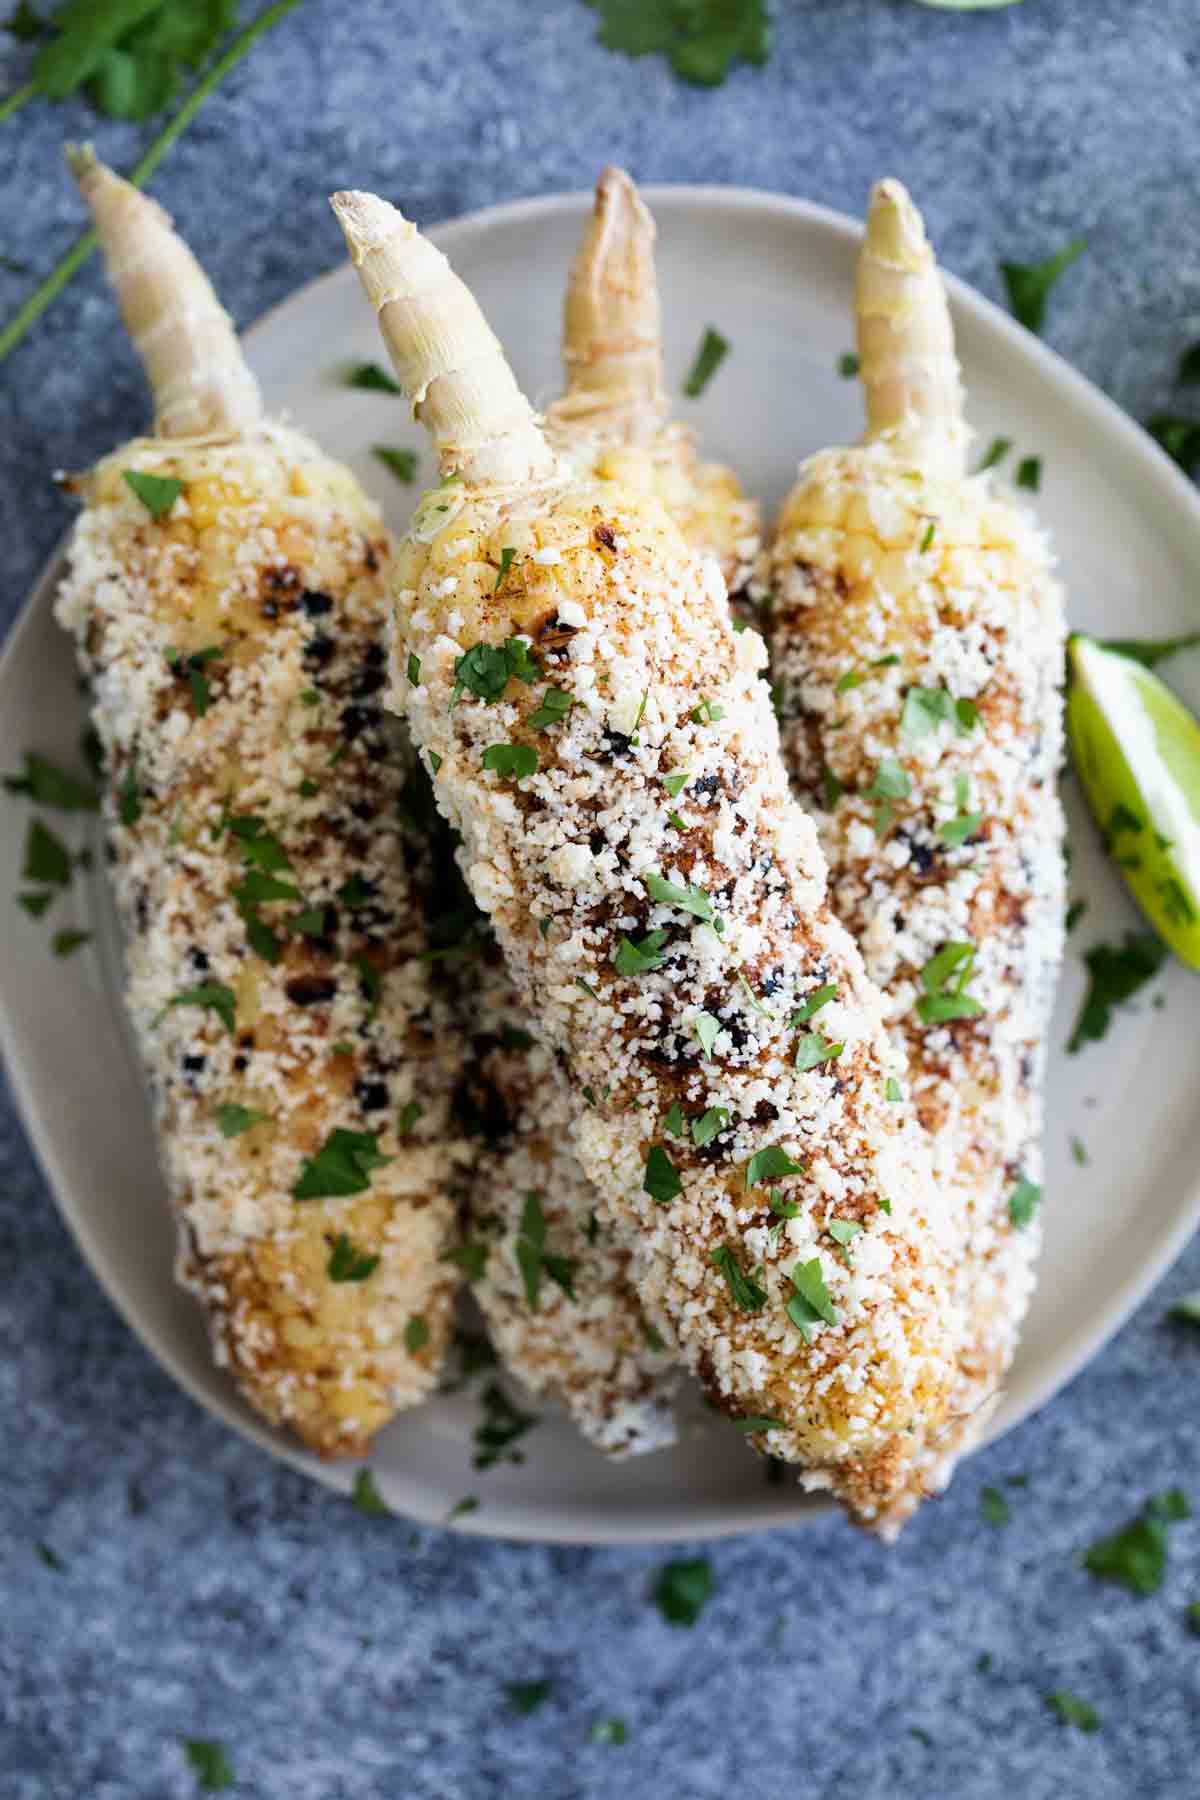 Grilled Mexican Corn On The Cob Recipe Taste And Tell,What Does Poison Sumac Look Like In The Winter